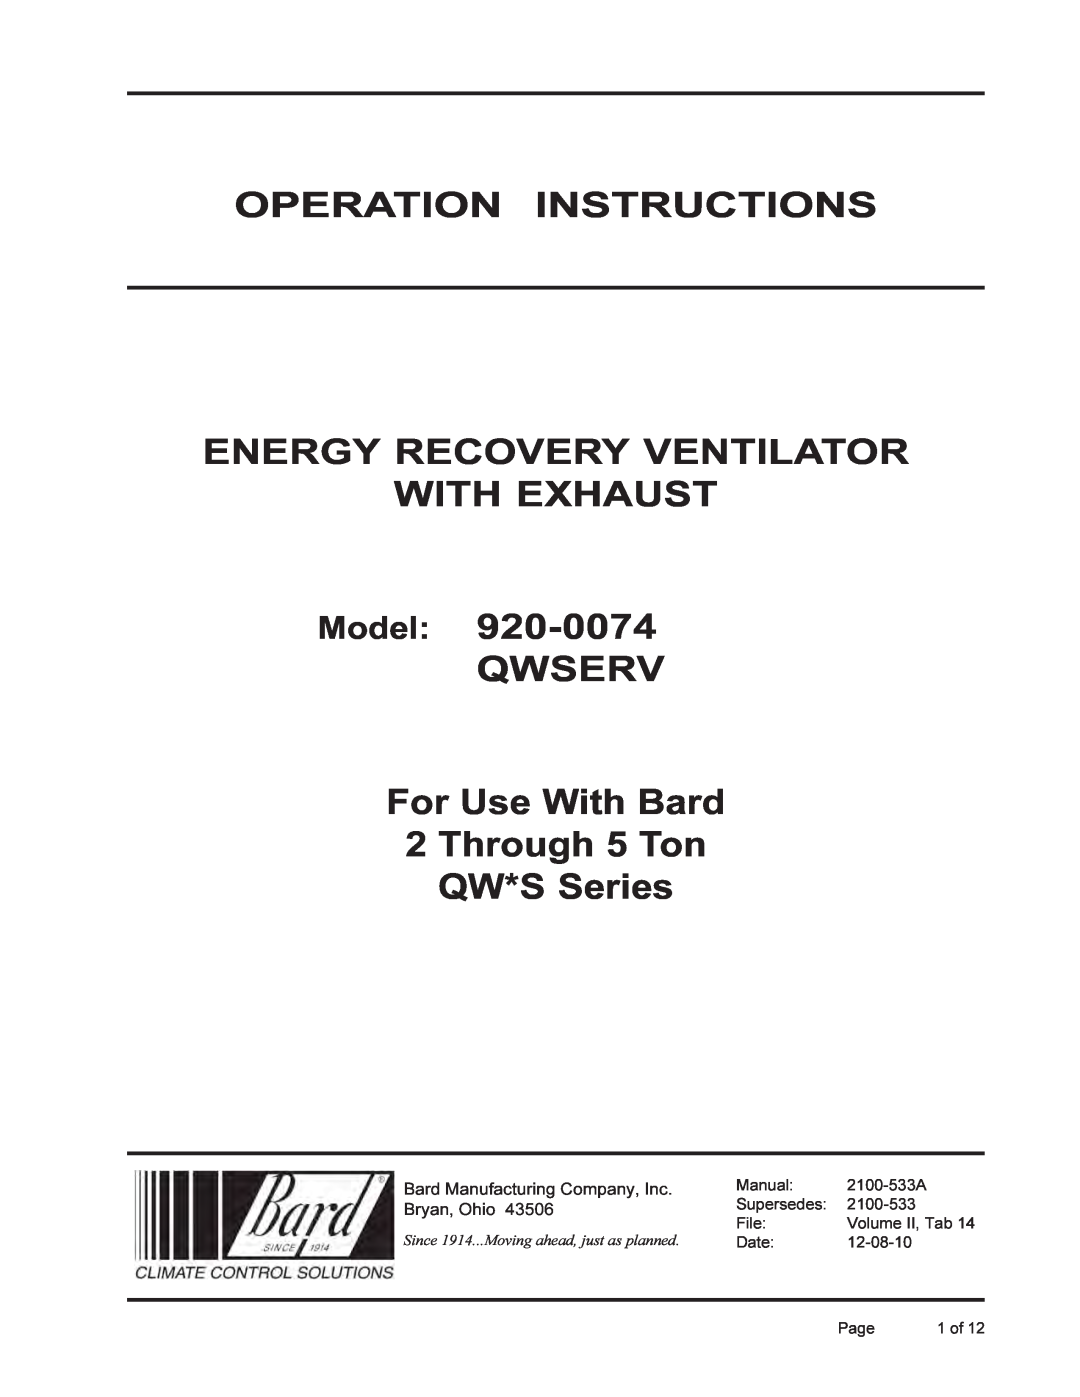 Bard 920-0074 qwserv manual OPERATION INSTRUCTIONS ENERGY RECOVERY VENTILATOR WITH EXHAUST Model, Bryan, Ohio, 1 of 